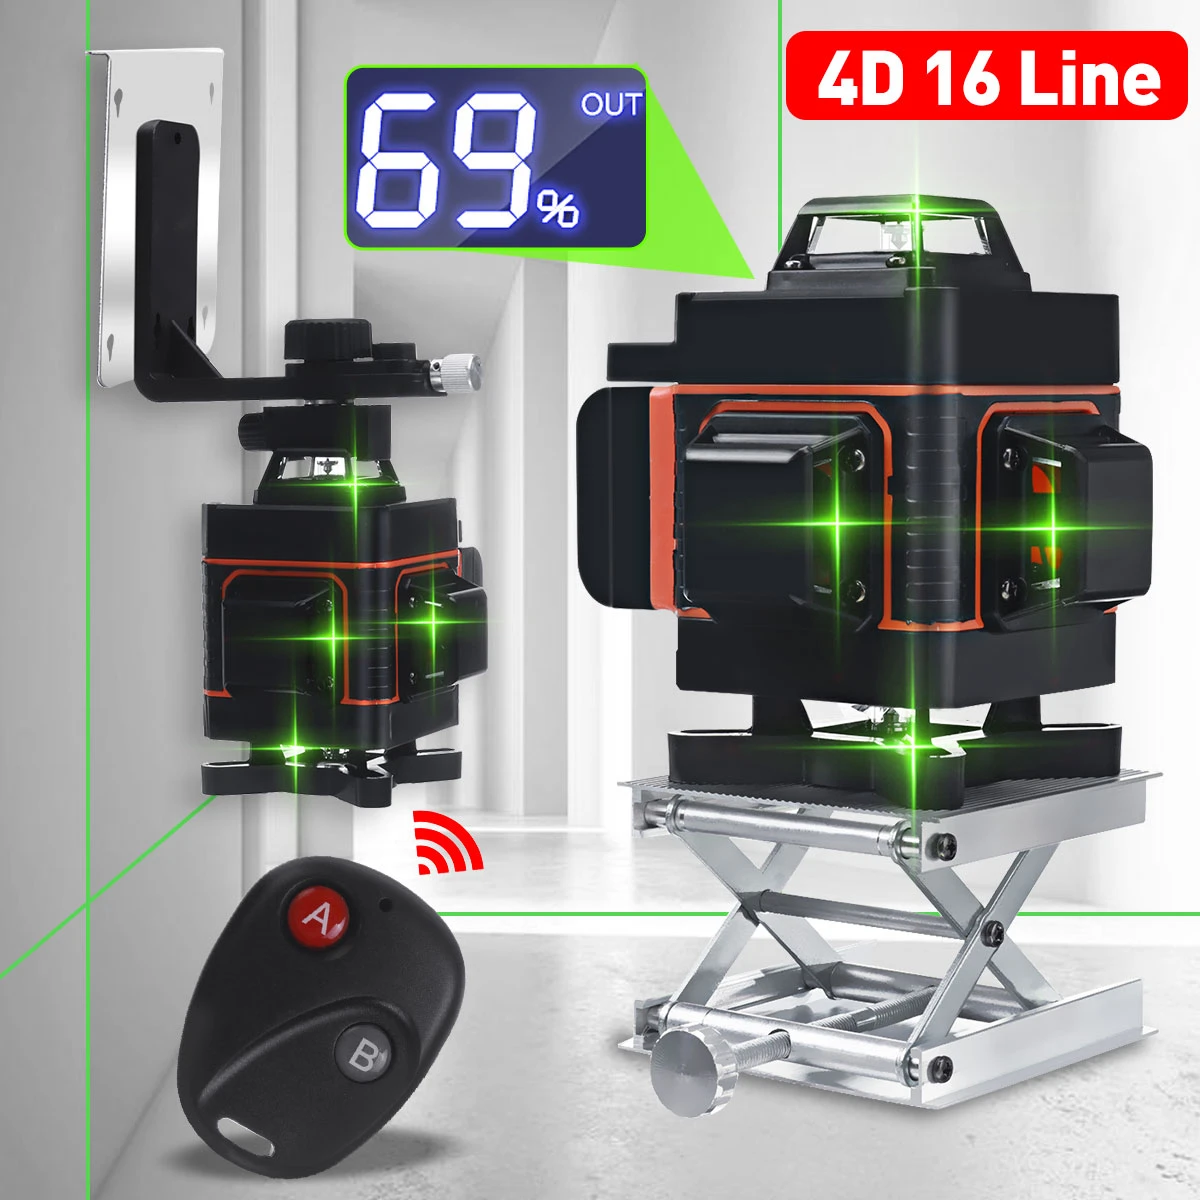 Laser Level 16/12 Lines 4D Green Light LED Display Auto Self Leveling 360° Laser Levels Horizontal Vertical Cross Remote Control